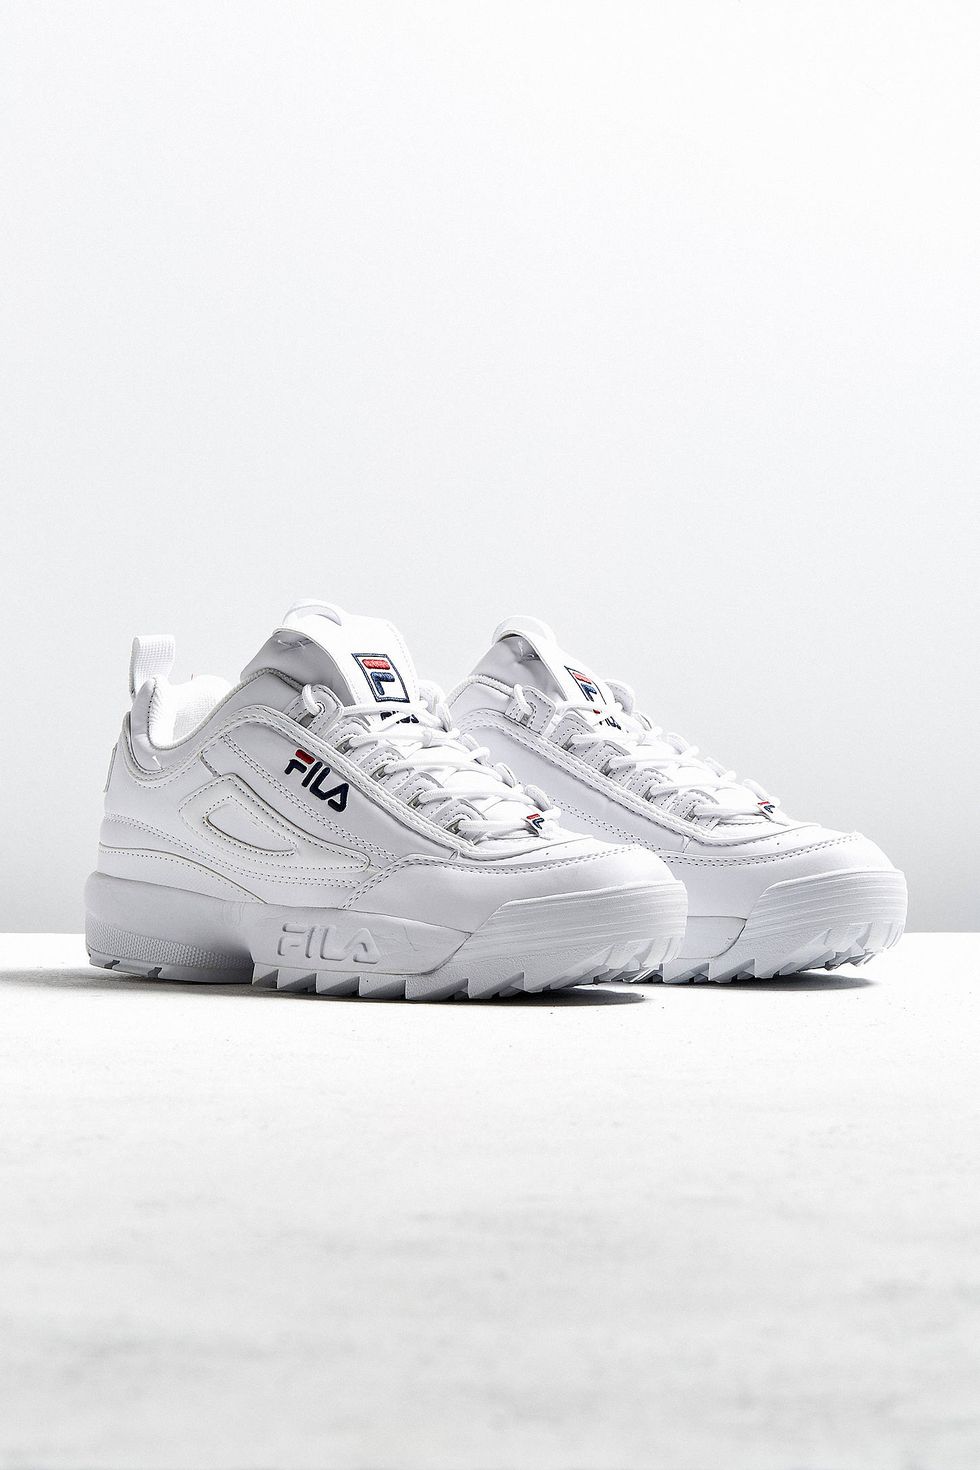 Fila Disruptors Are The Ugly Shoe du Jour - Help Me, I'm About to Break My Shopping Fast For These Shoes